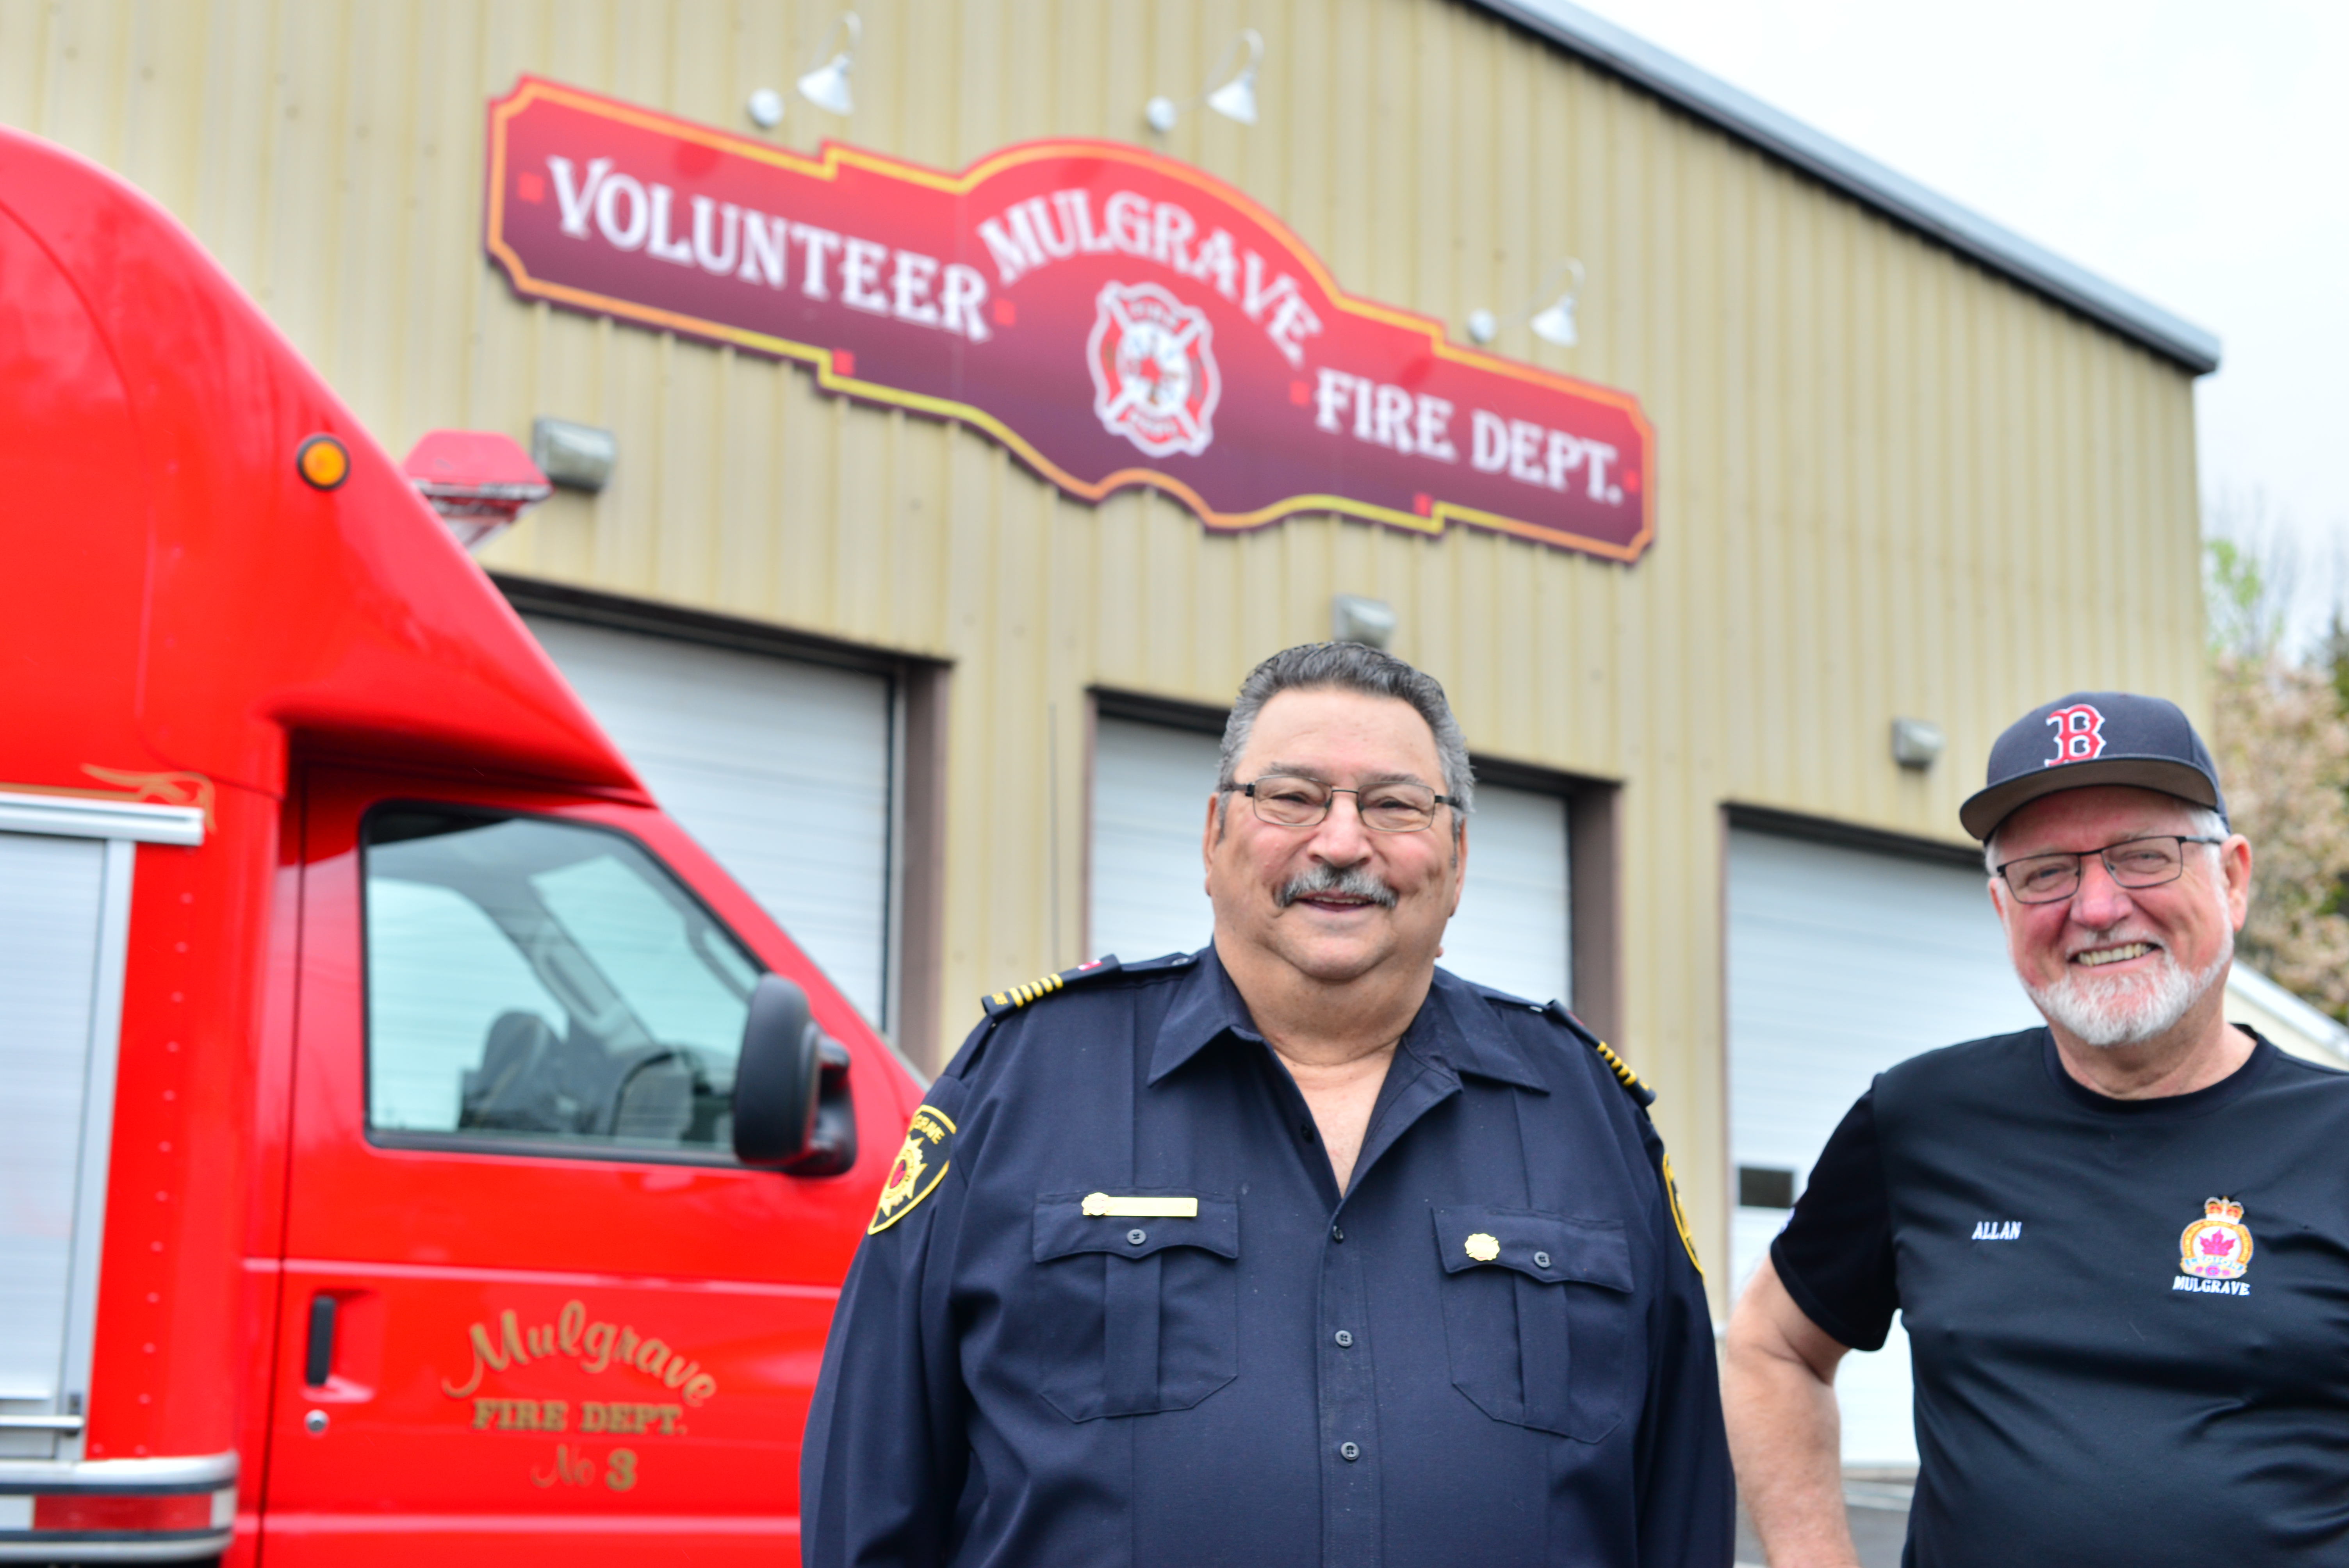 Mulgrave's Volunteer Fire Department replaced truck frame